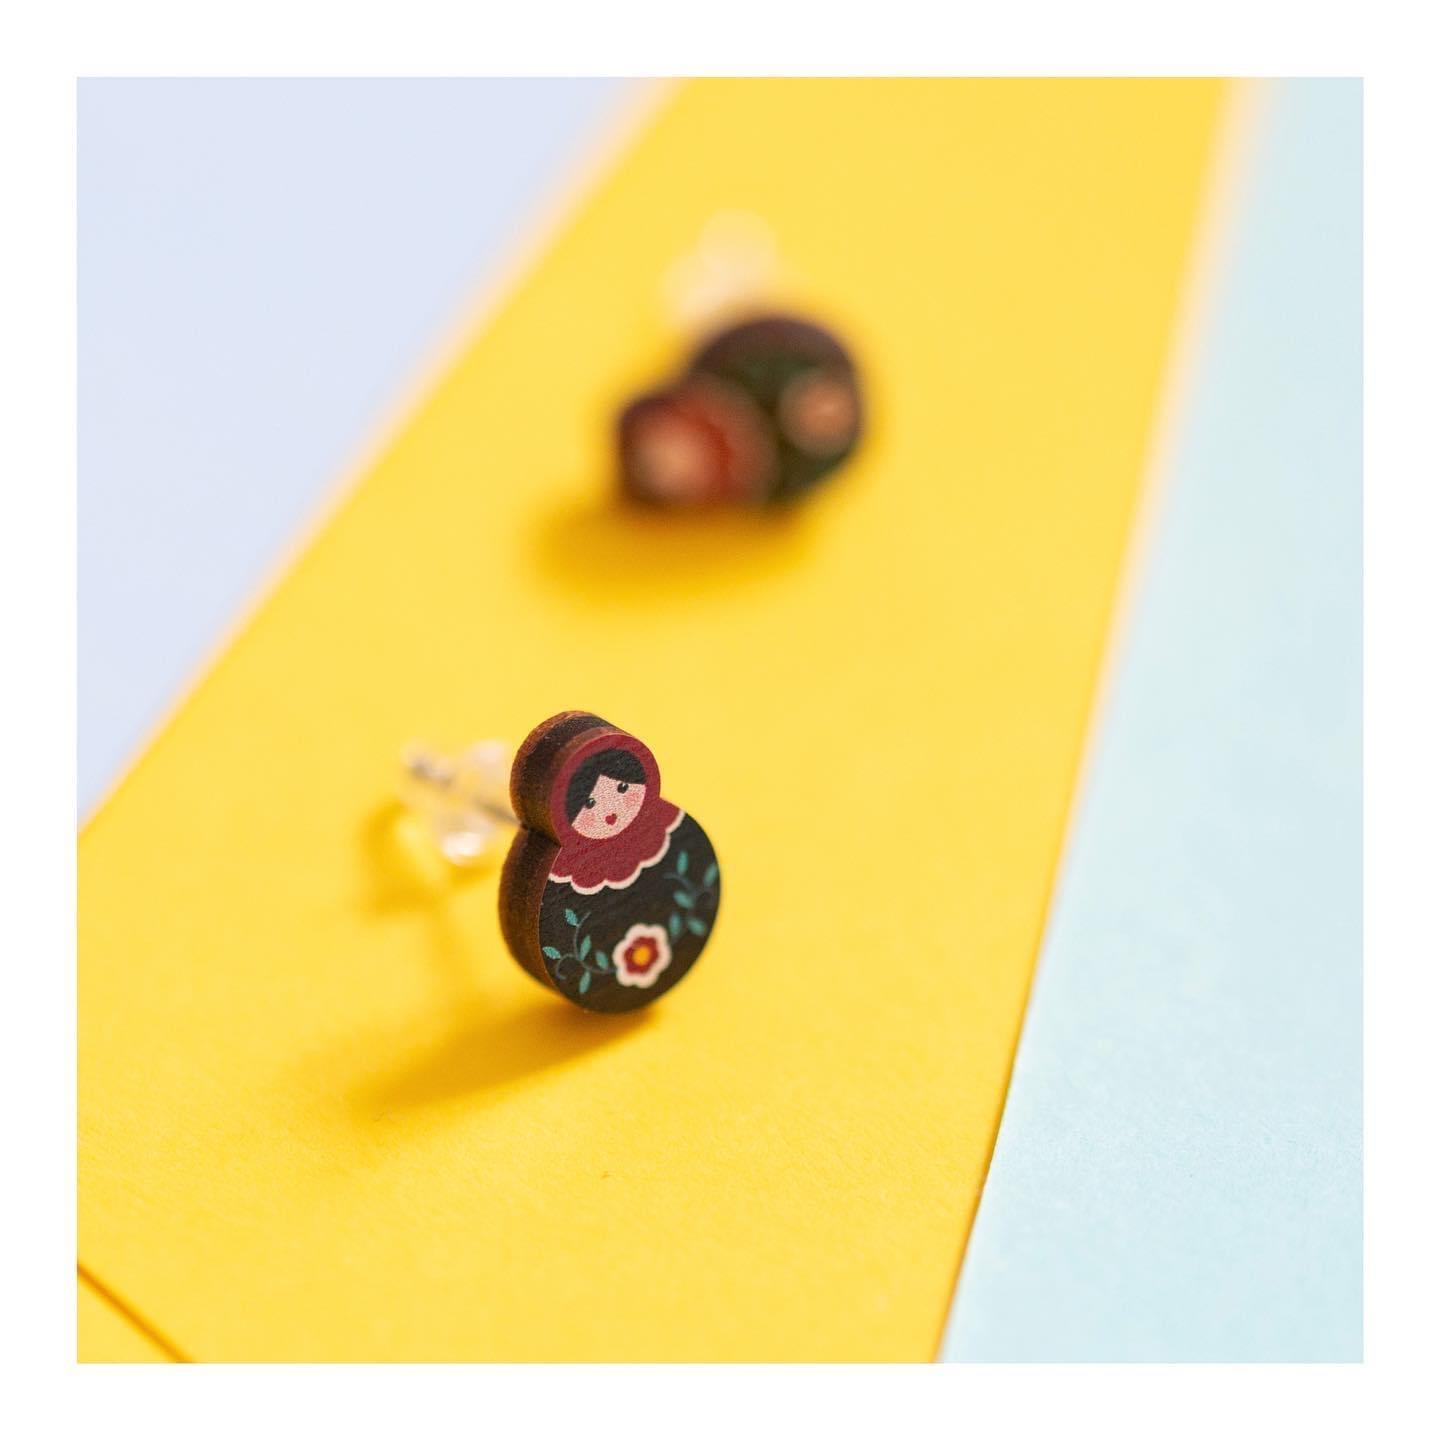 Product Russian Doll Wooden Stud Earrings - Boggle Hole image